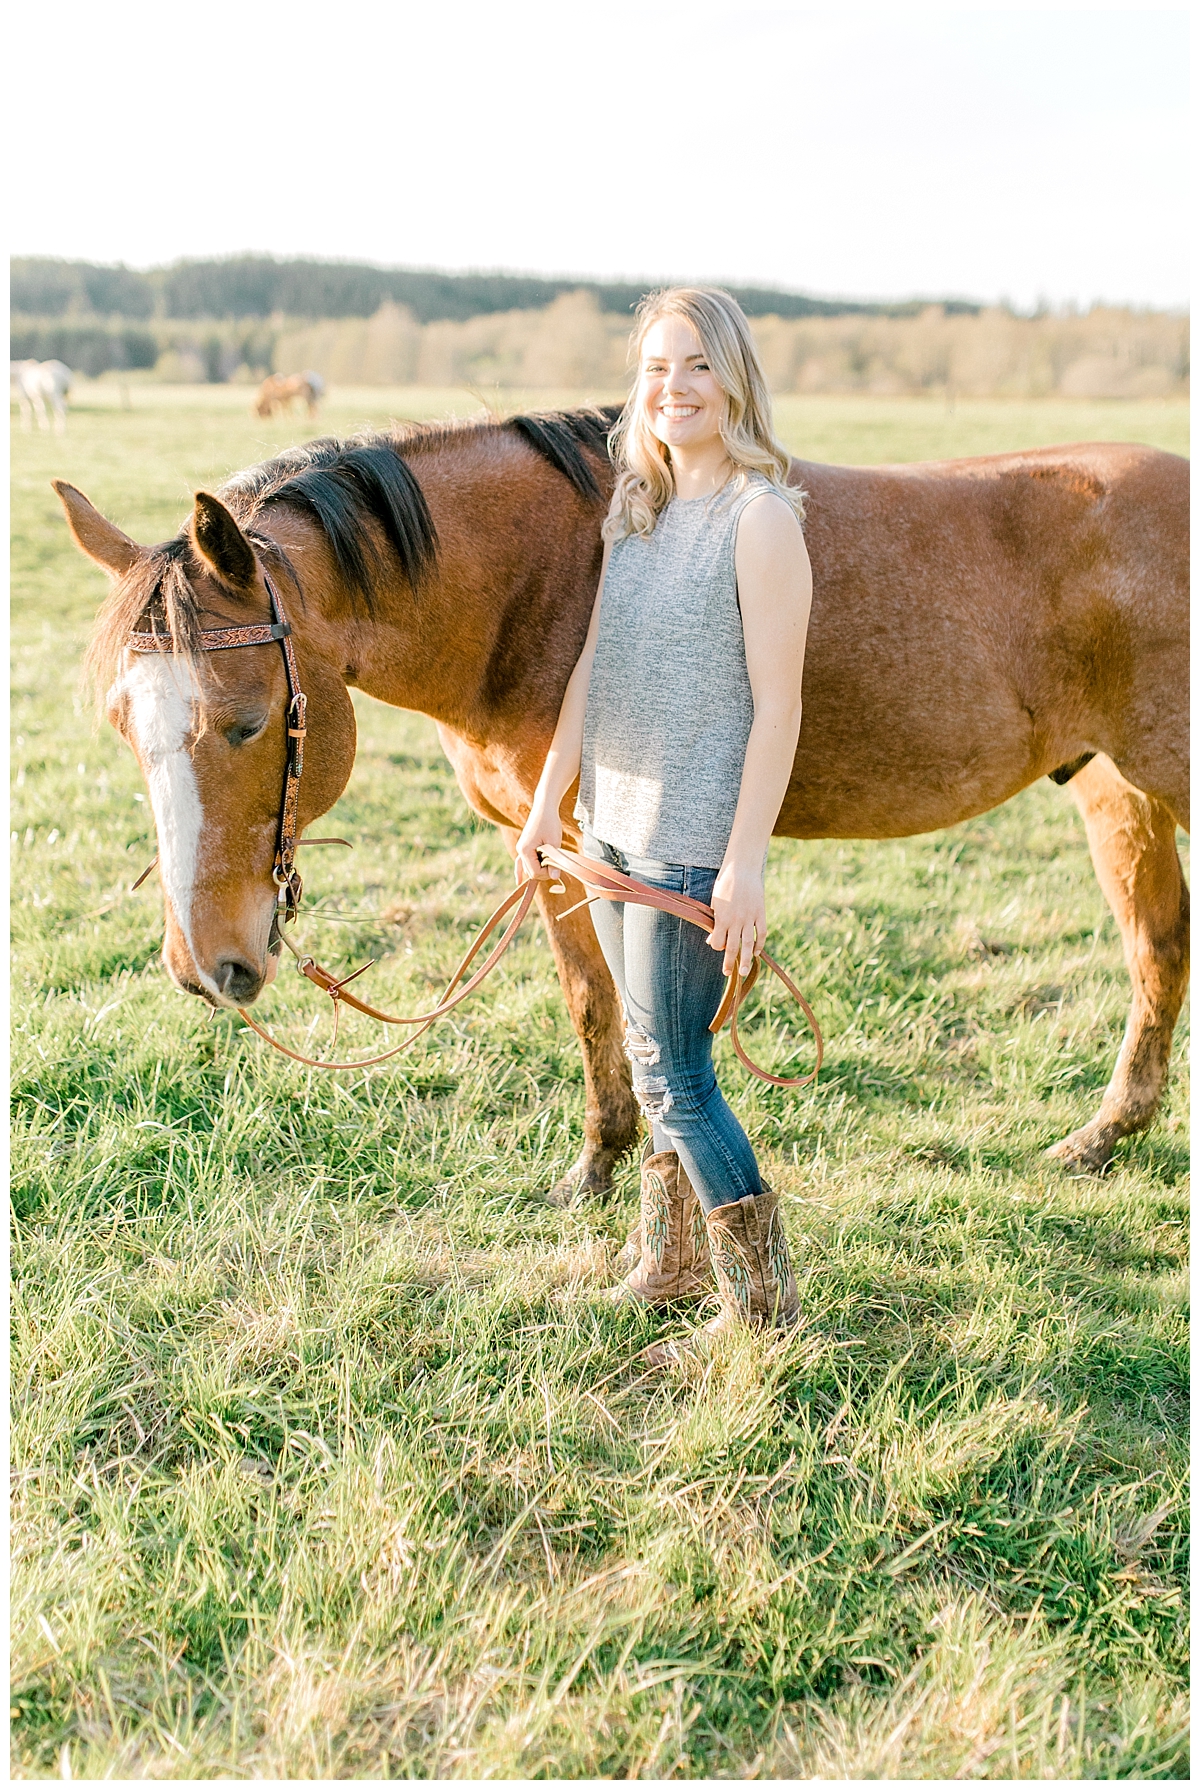 Sunset Senior Session with Horse | Senior Session Inspiration Session | Horse Photo Session | Pacific Northwest Light and Airy Wedding and Portrait Photographer | Emma Rose Company | Kindred Presets Senior Session Horses.jpg